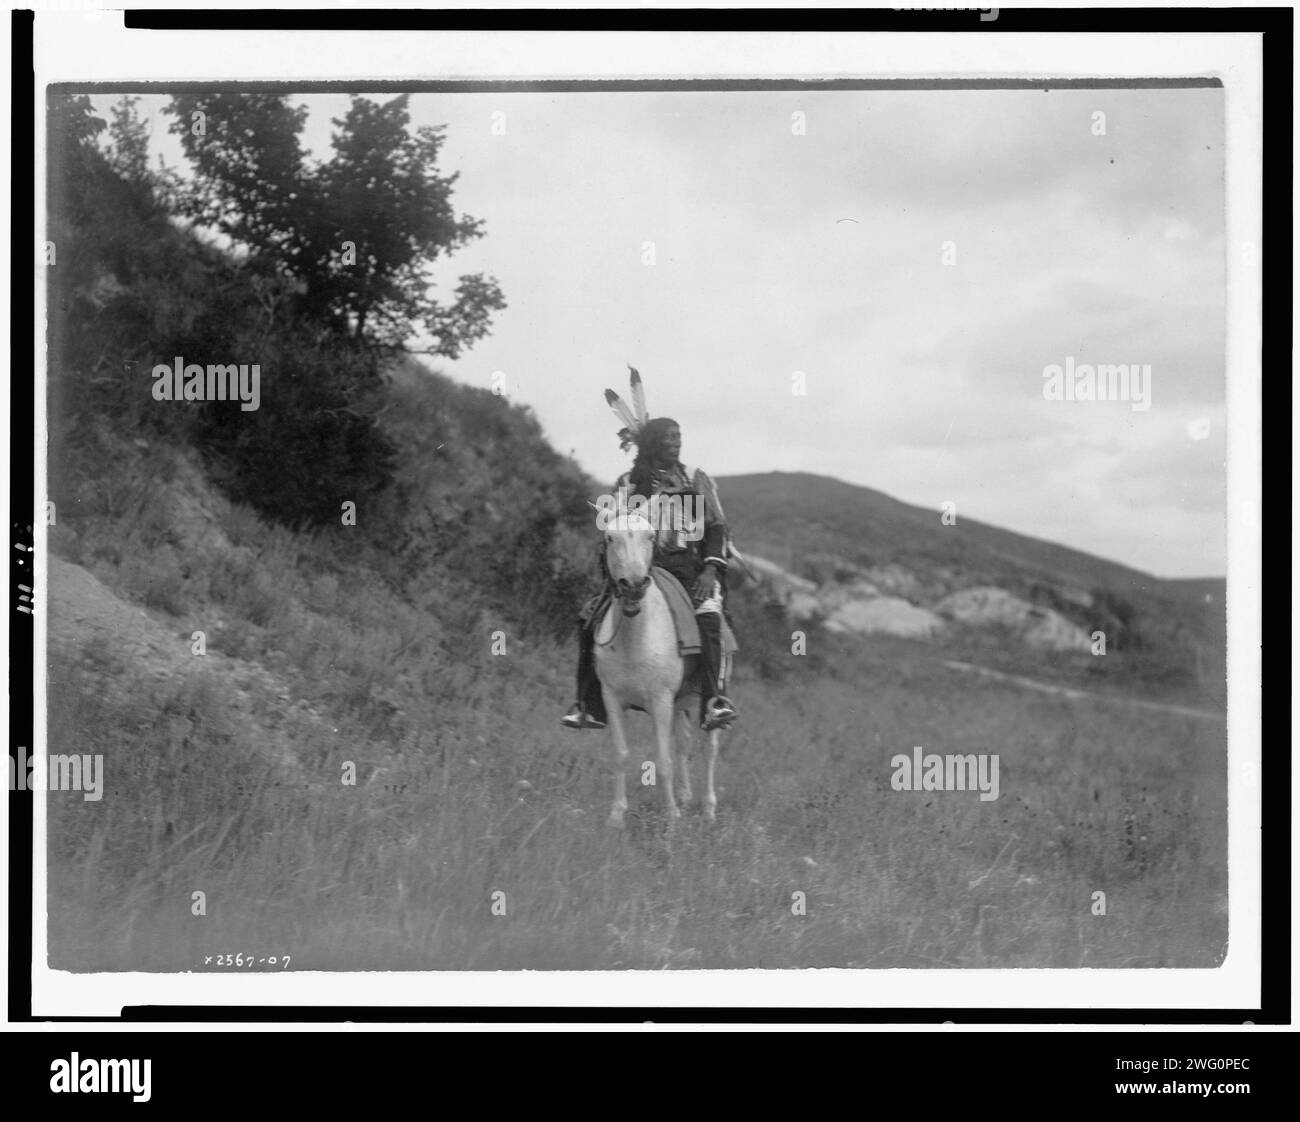 Sioux Indian on horseback, wearing two feathers, beaded buckskin shirt, and leggings, with hills in background, c1907. Stock Photo